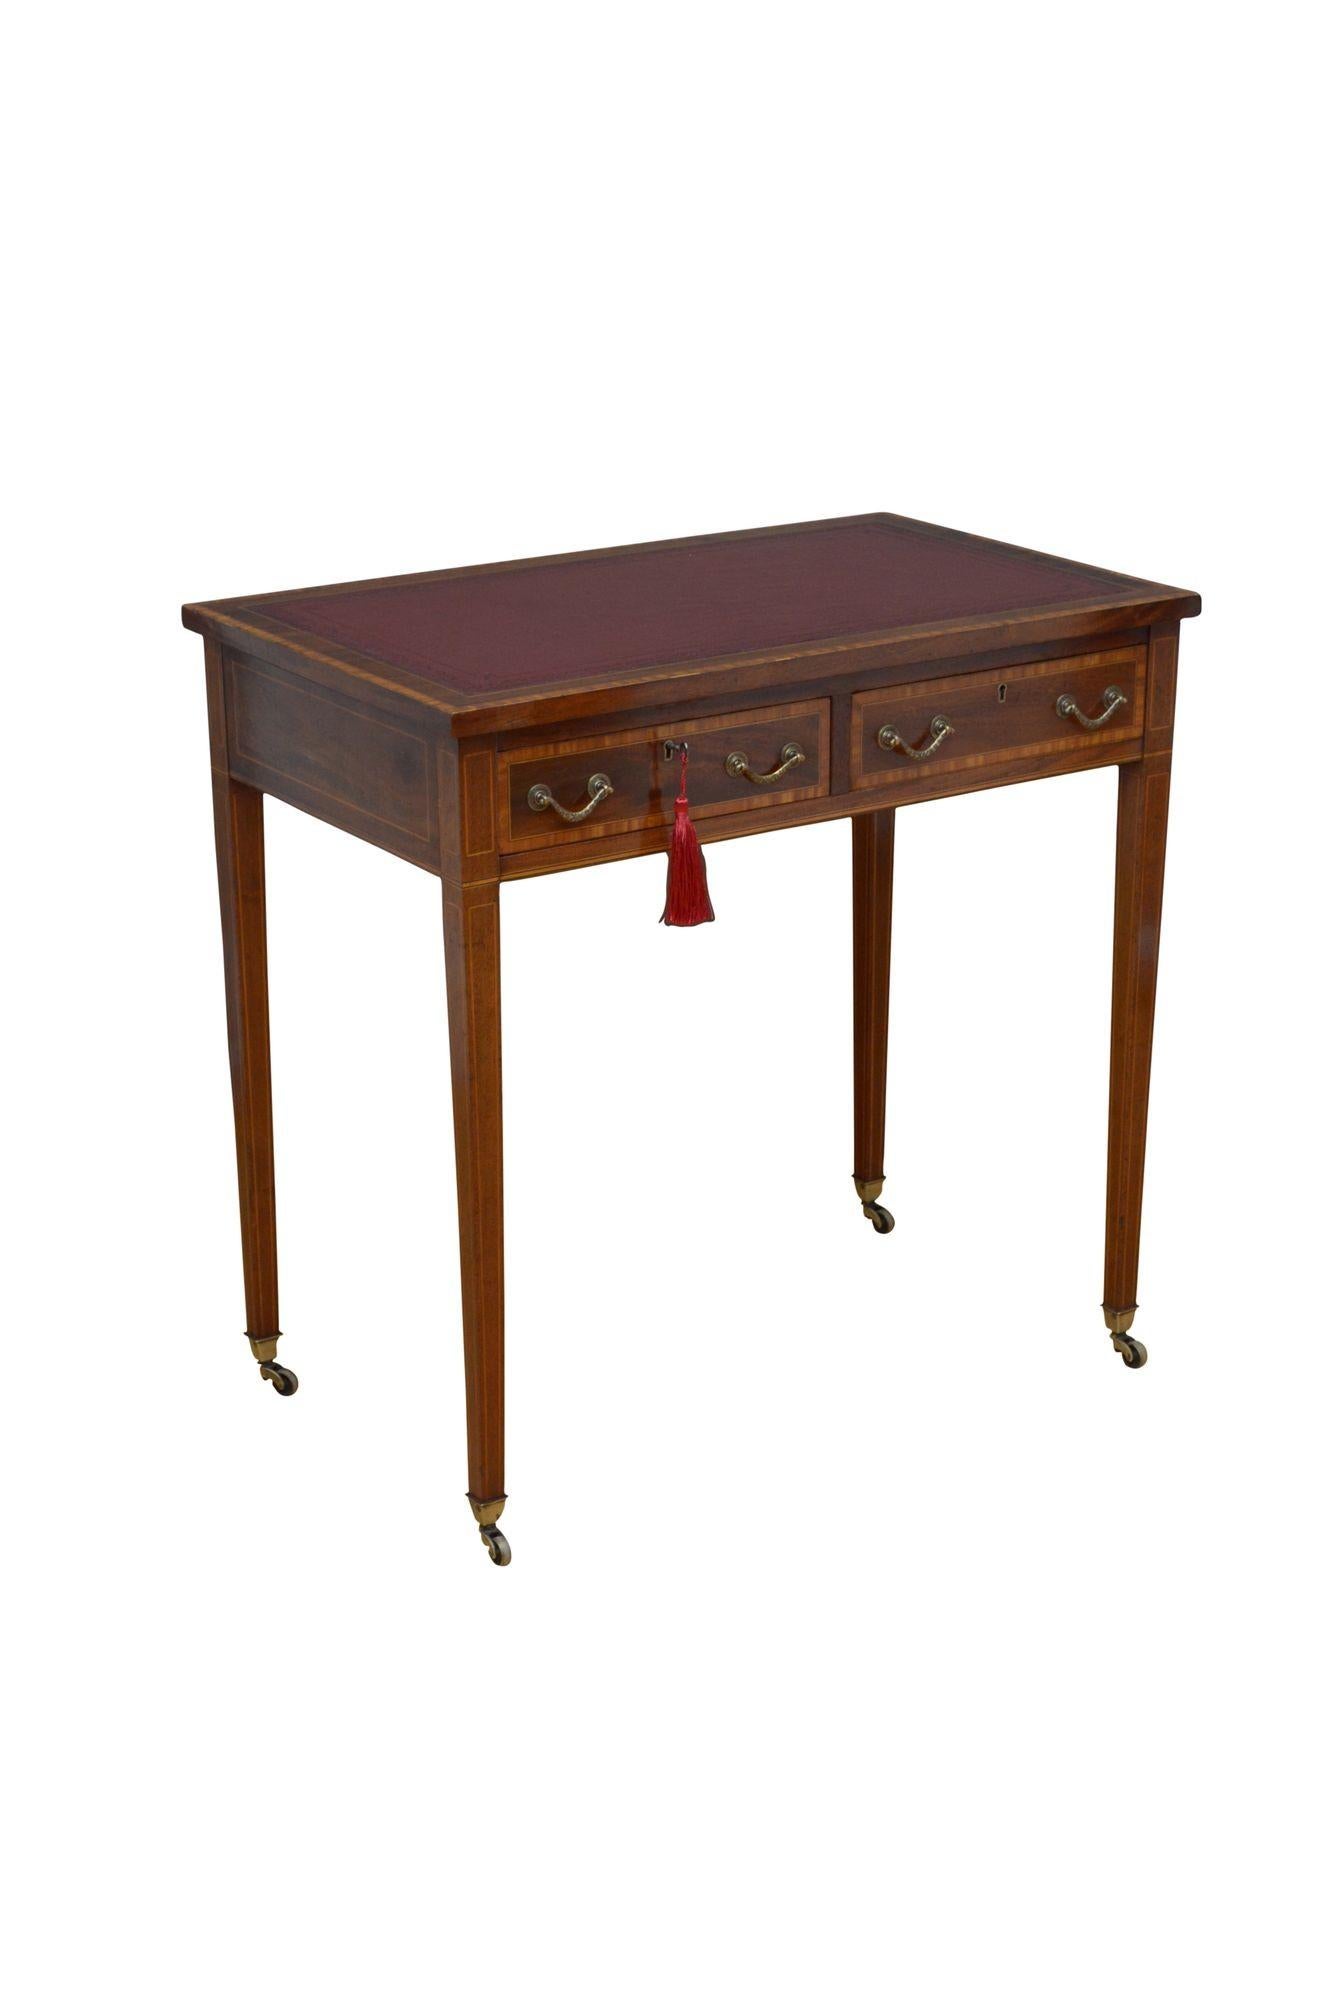 English Edwardian Writing Table in Mahogany In Good Condition For Sale In Whaley Bridge, GB